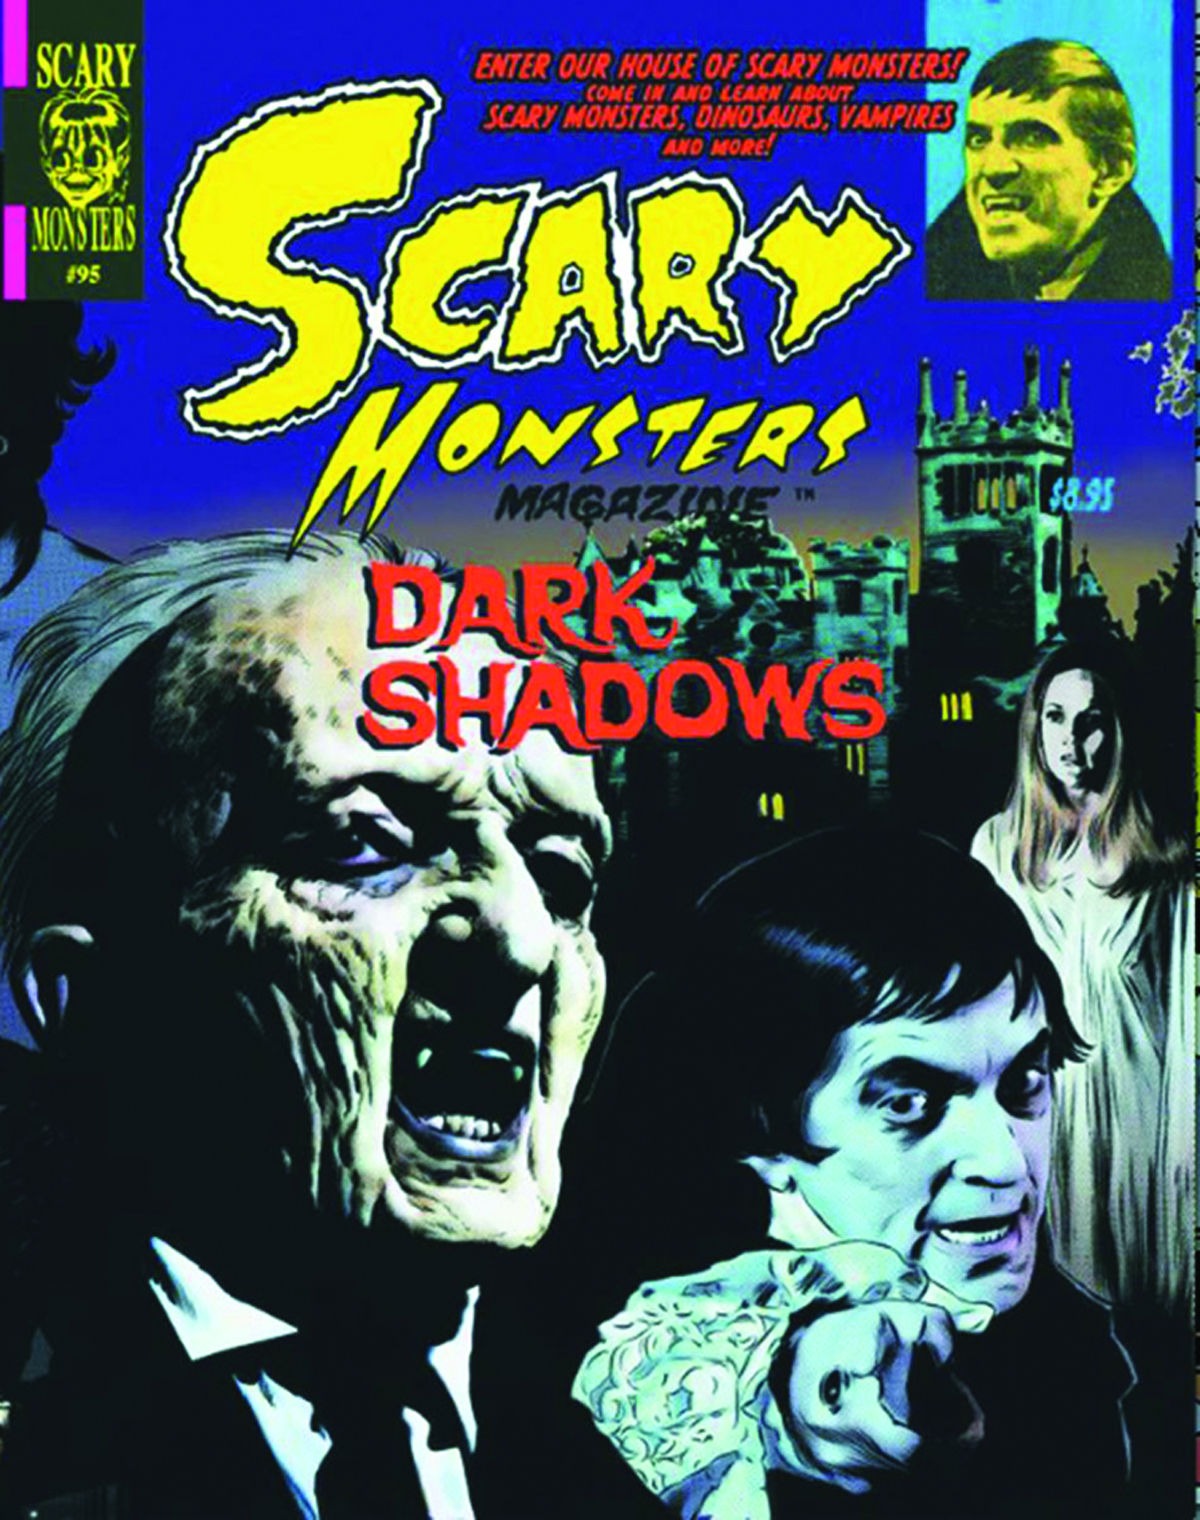 SCARY MONSTERS MAGAZINE #98